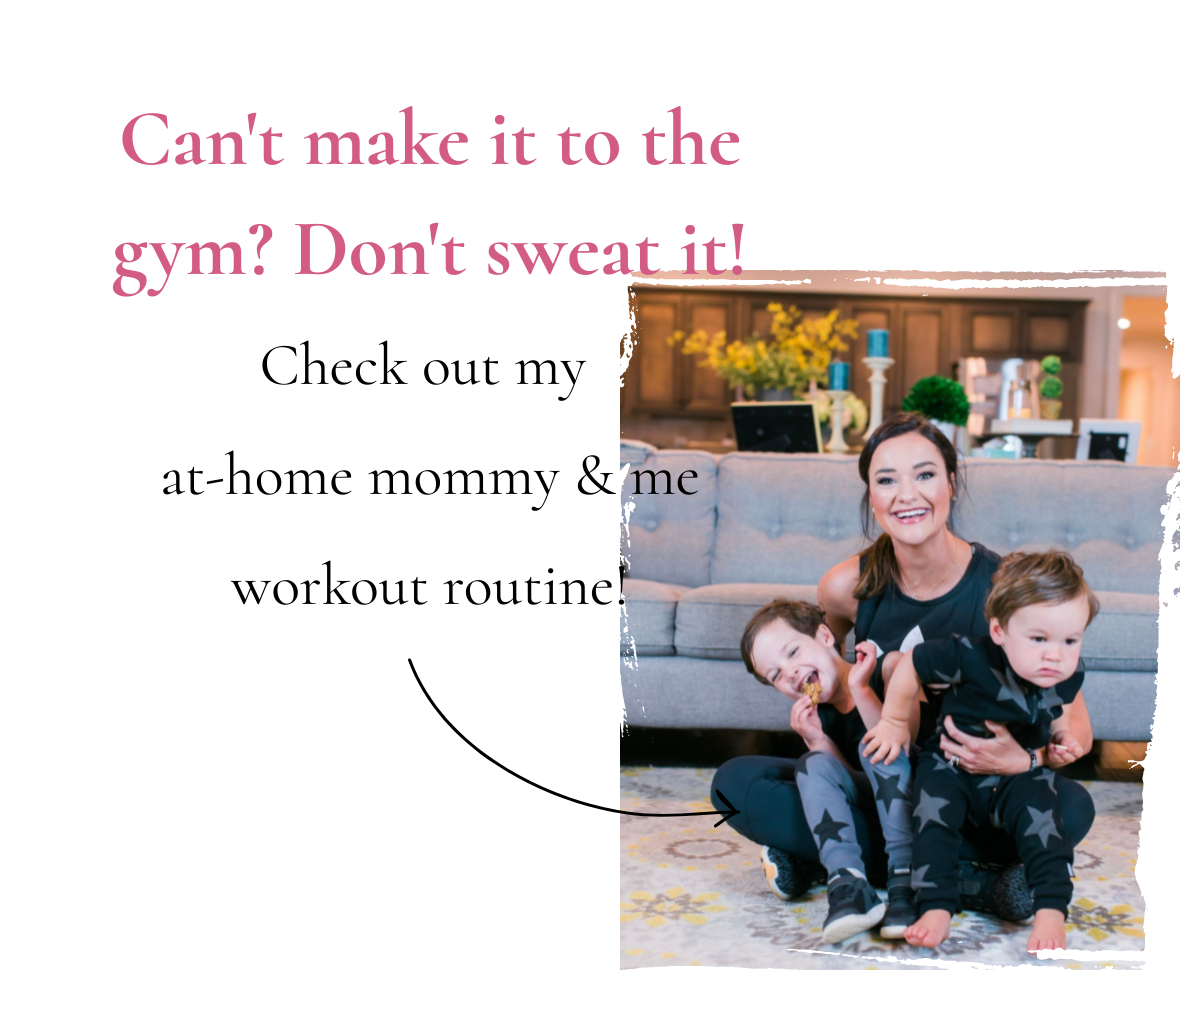 Health + fitness blogger, My Life Well Loved, shares how to get 10000 steps a day and the importance for busy moms!